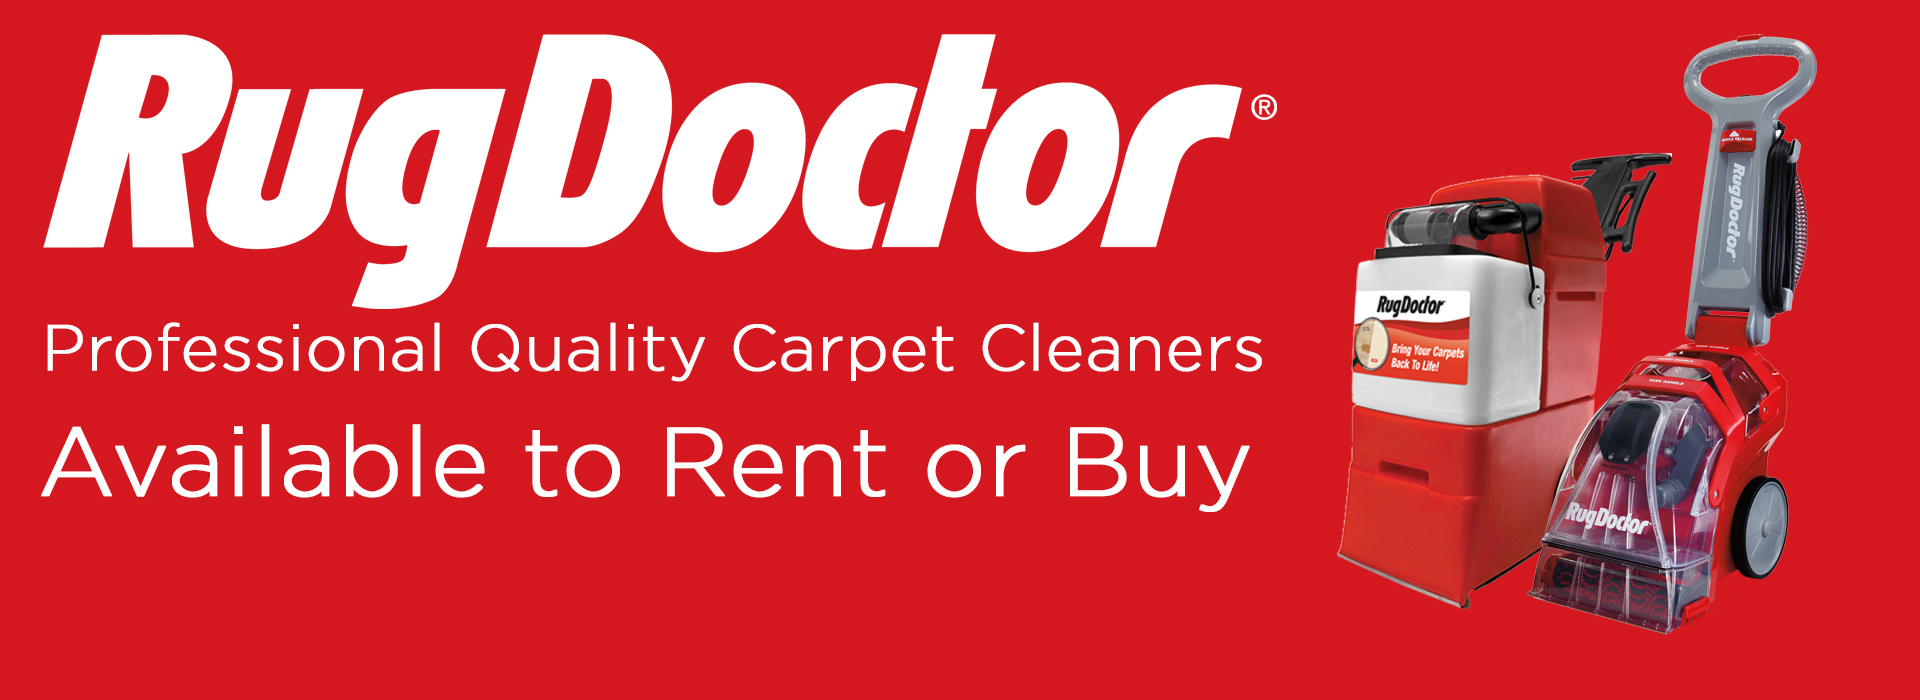 Rug Doctor Homebase, How Much Does A Rug Doctor Cost To Hire Uk